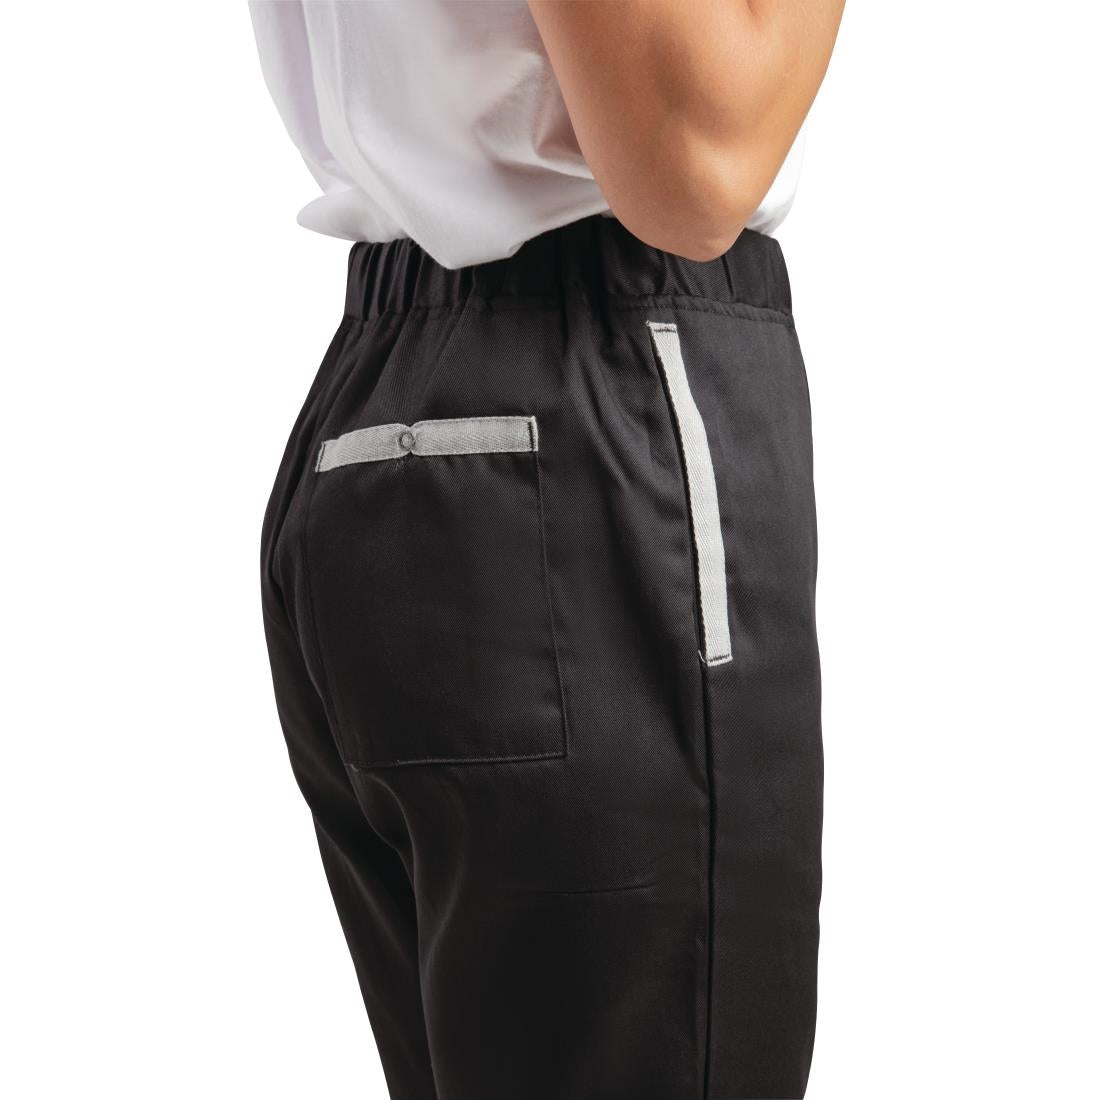 B989 Whites Southside Chefs Utility Trousers Black JD Catering Equipment Solutions Ltd